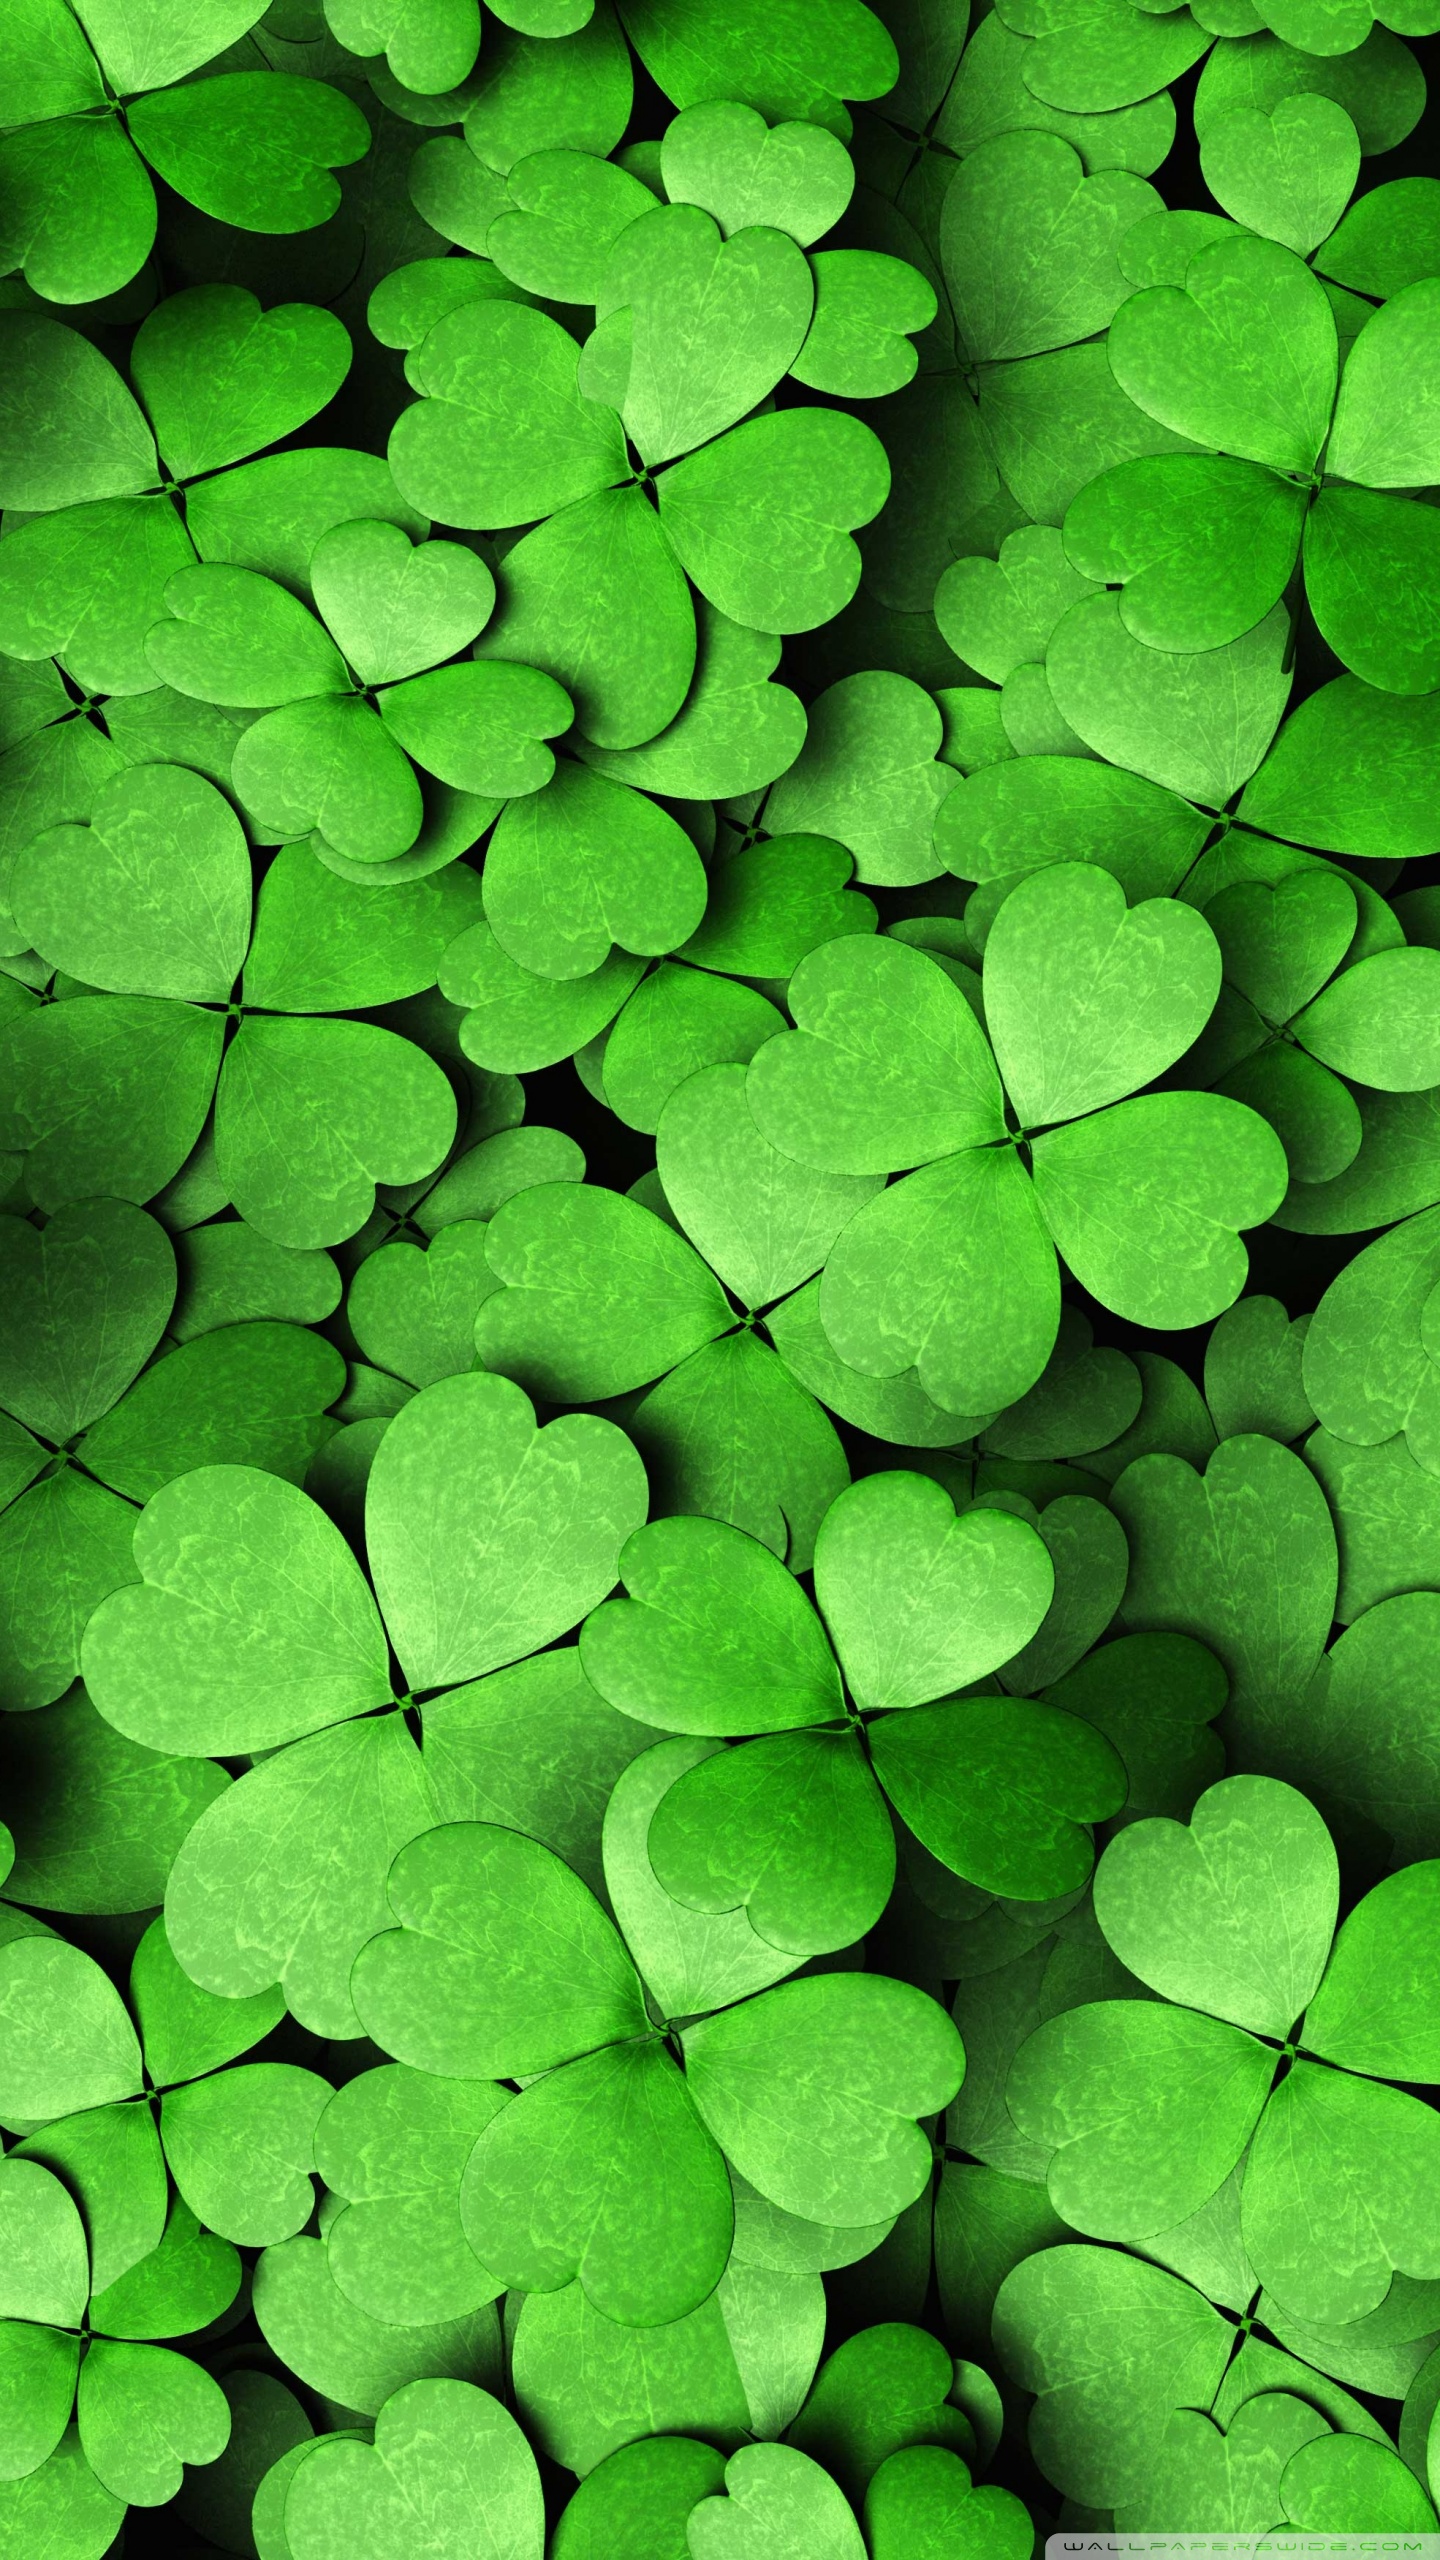 [47+] Android 4 Leaves Clover Wallpapers | WallpaperSafari.com